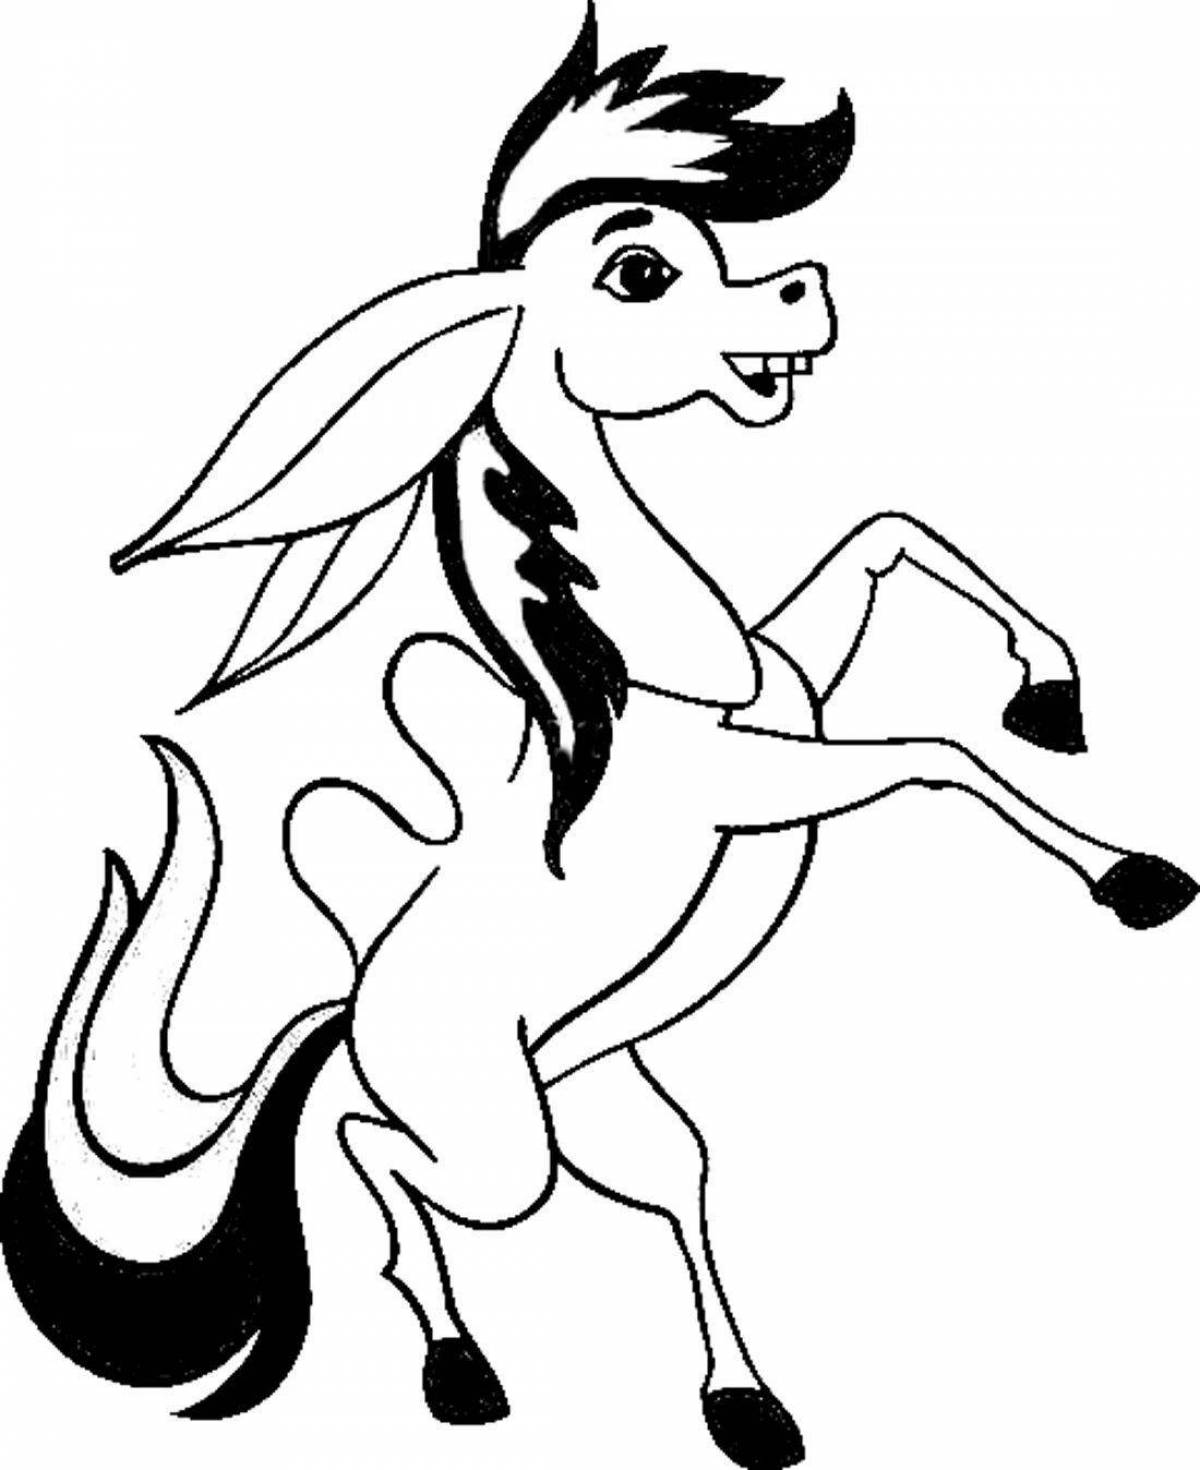 Coloring page nice humpbacked horse